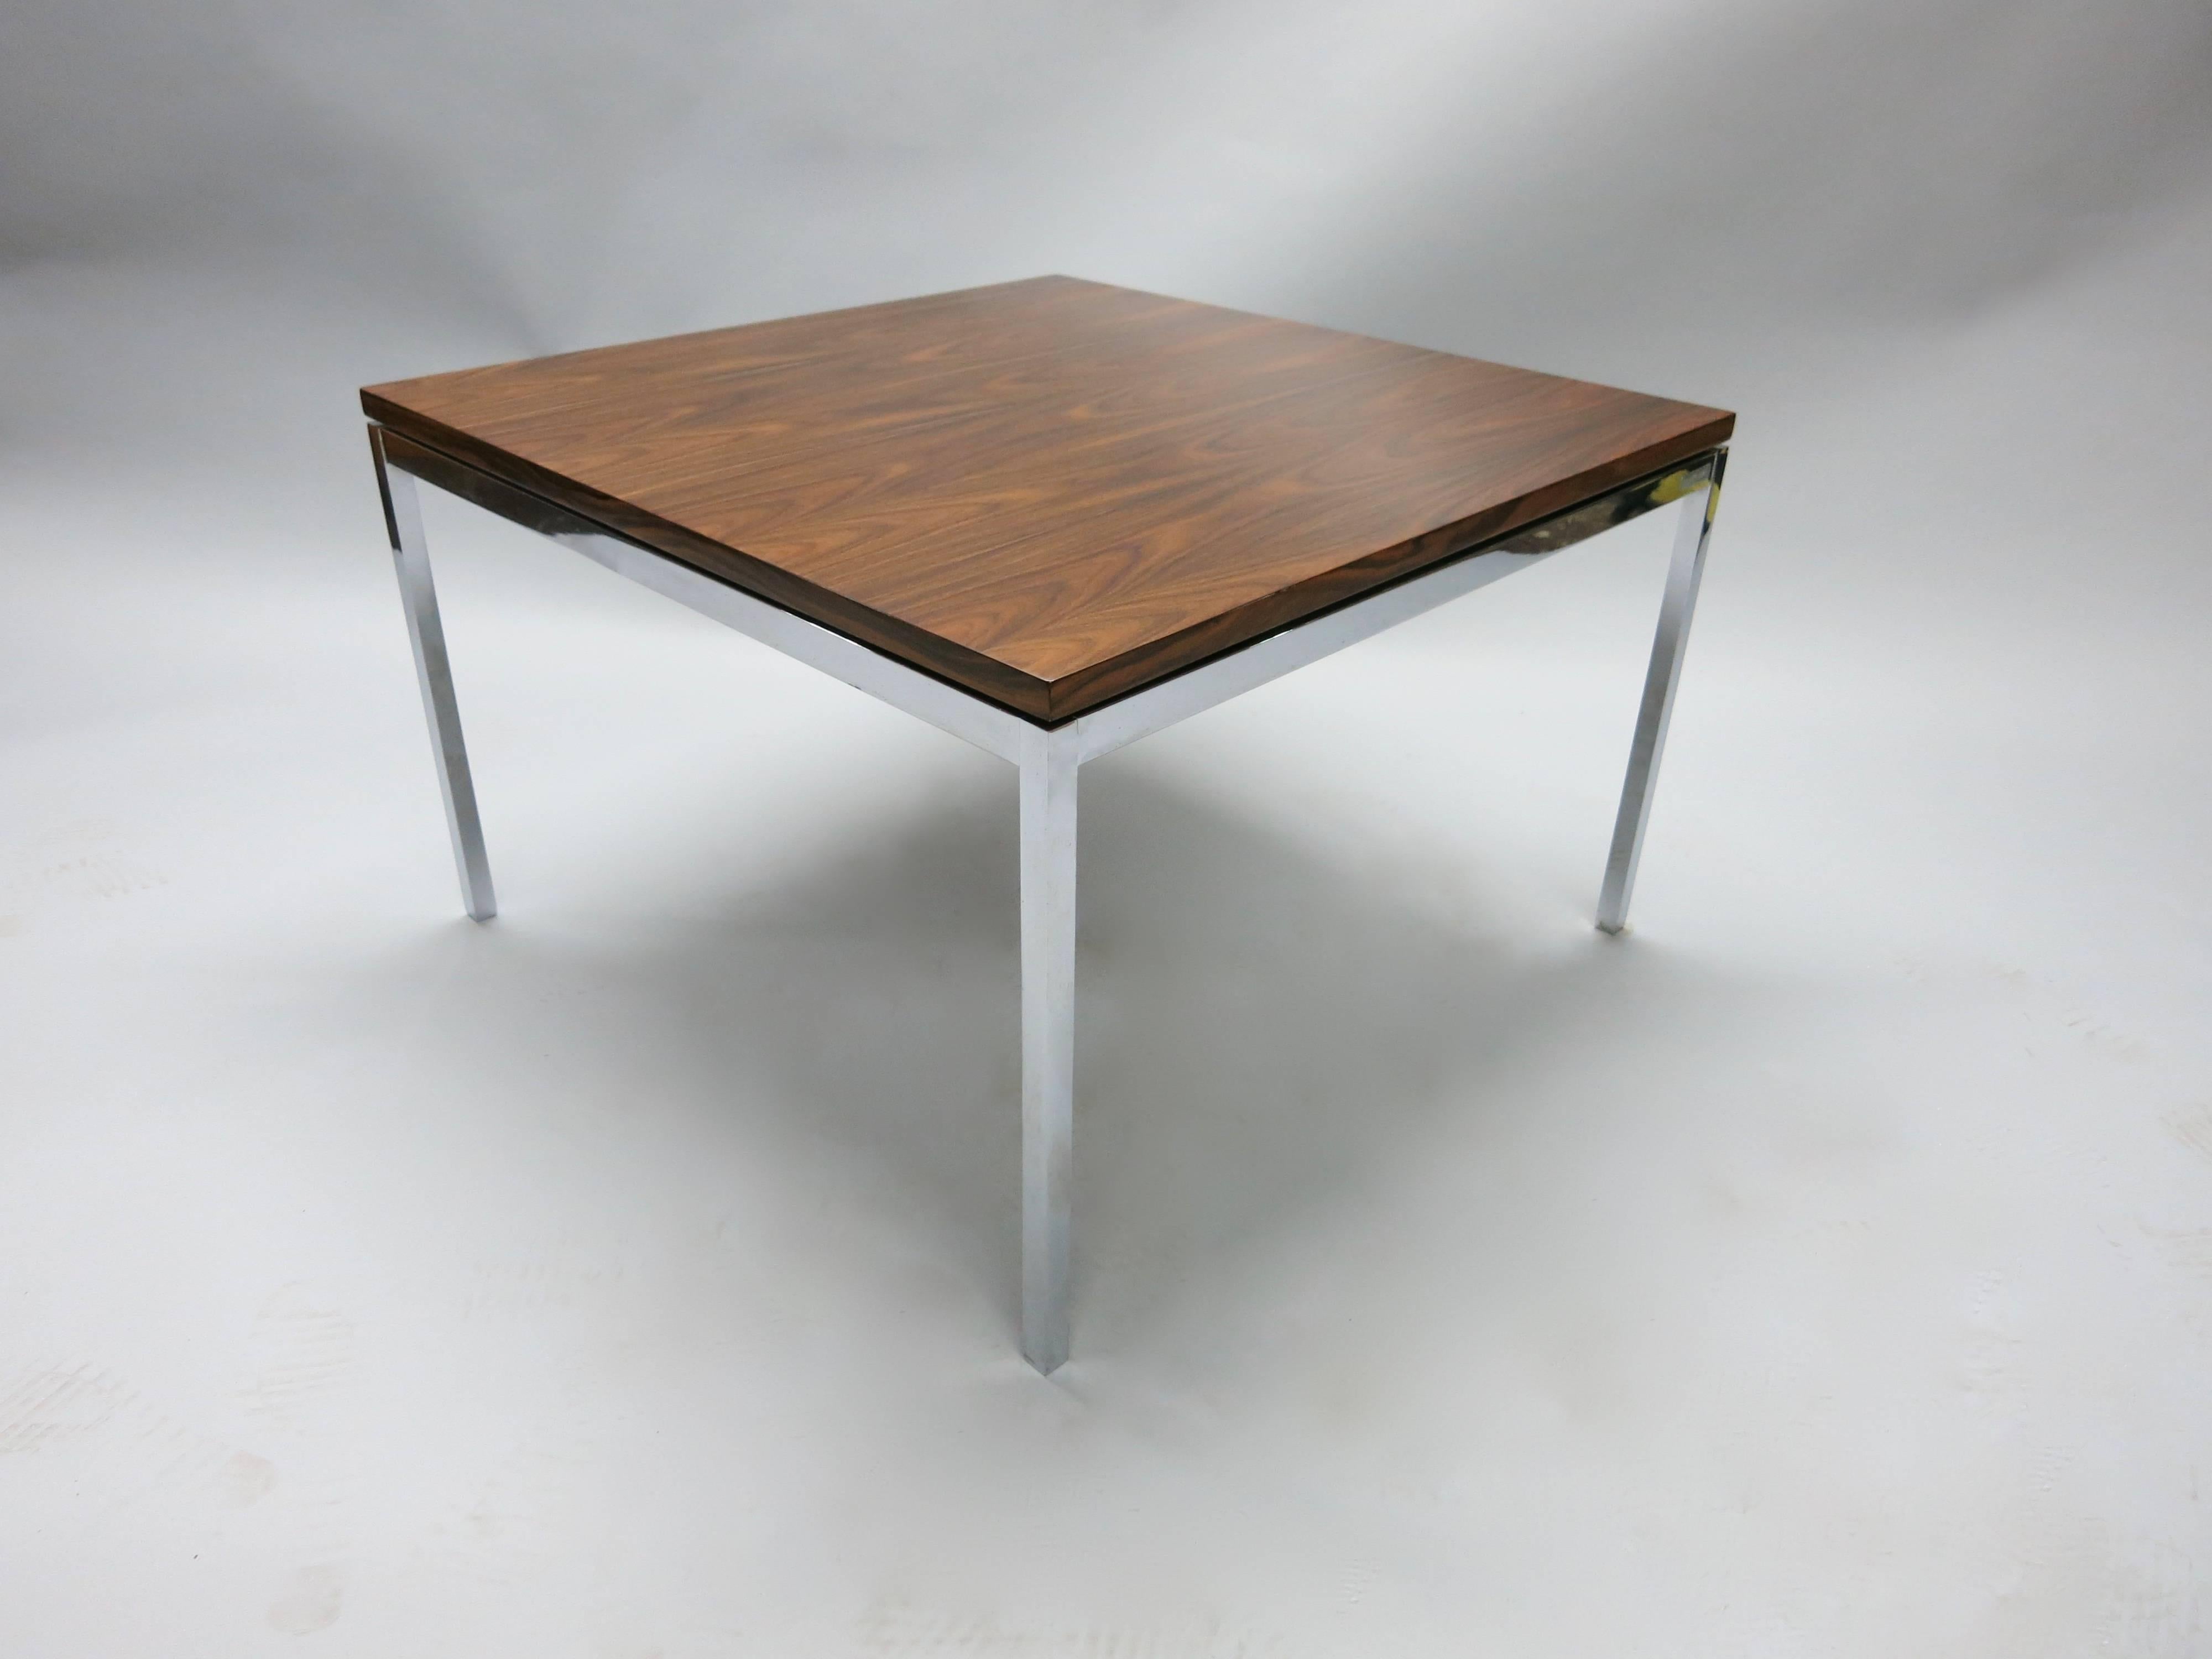 Table with a 'floating' rosewood top and chromed base in excellent condition, no chips or damages in either the wood or metal.